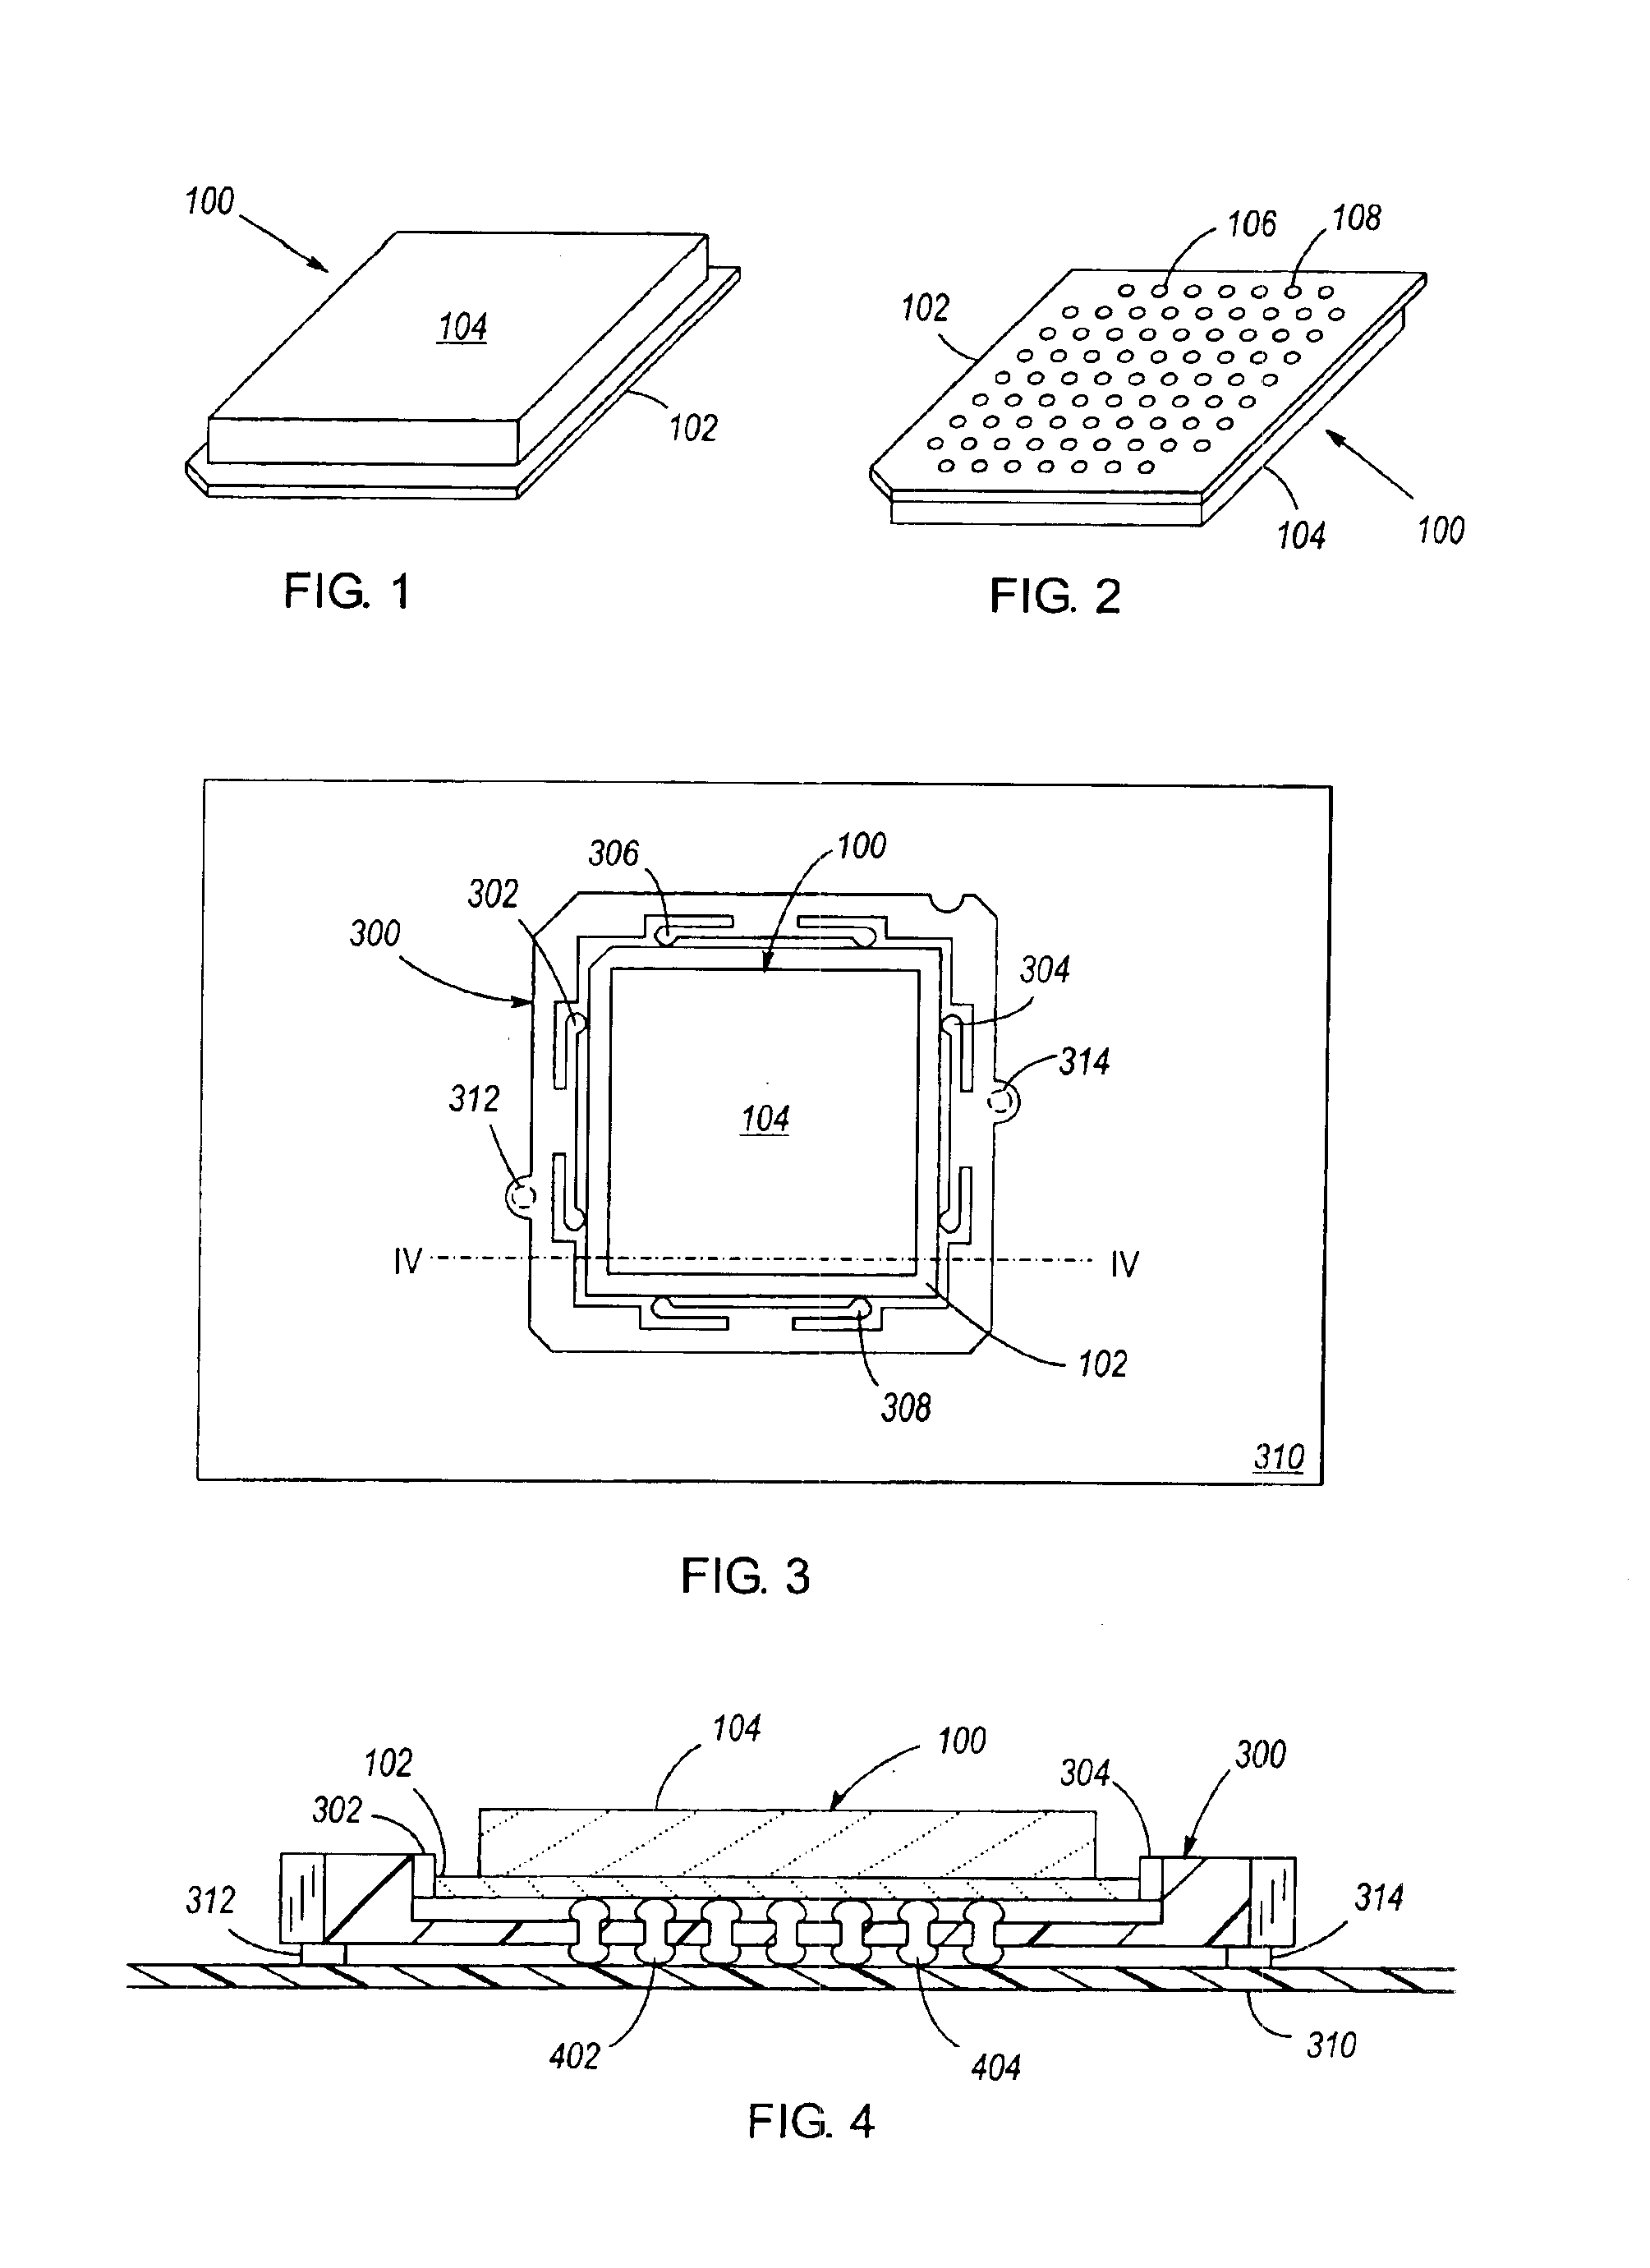 Methods for providing an integrated circuit package with an alignment mechanism